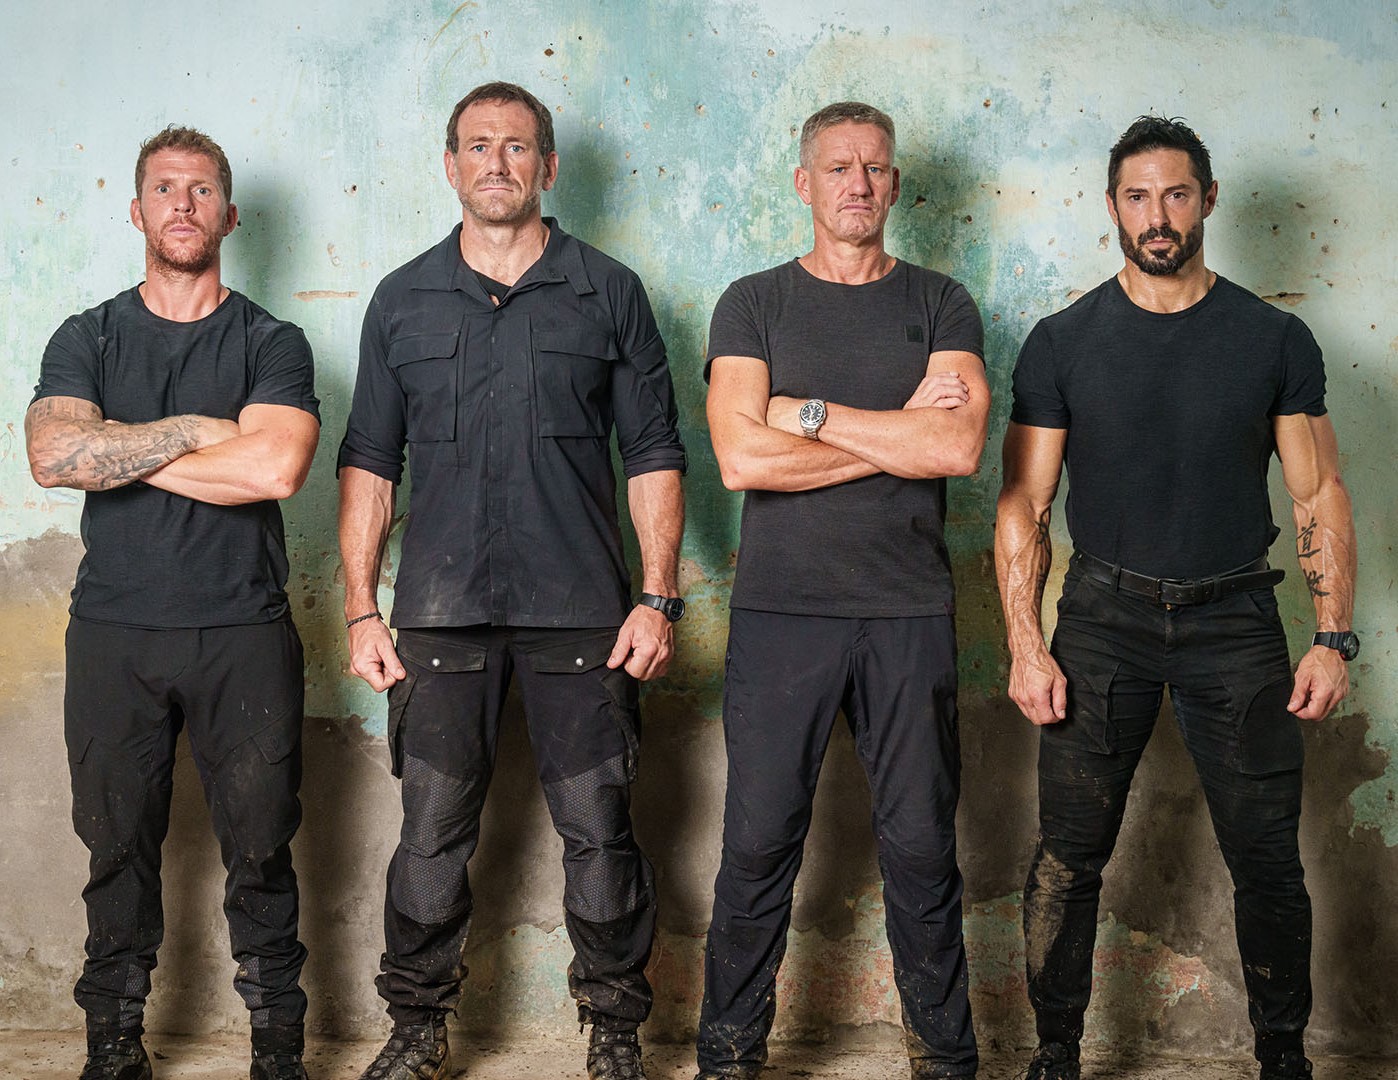 SAS Who Dares Wins for Channel 4